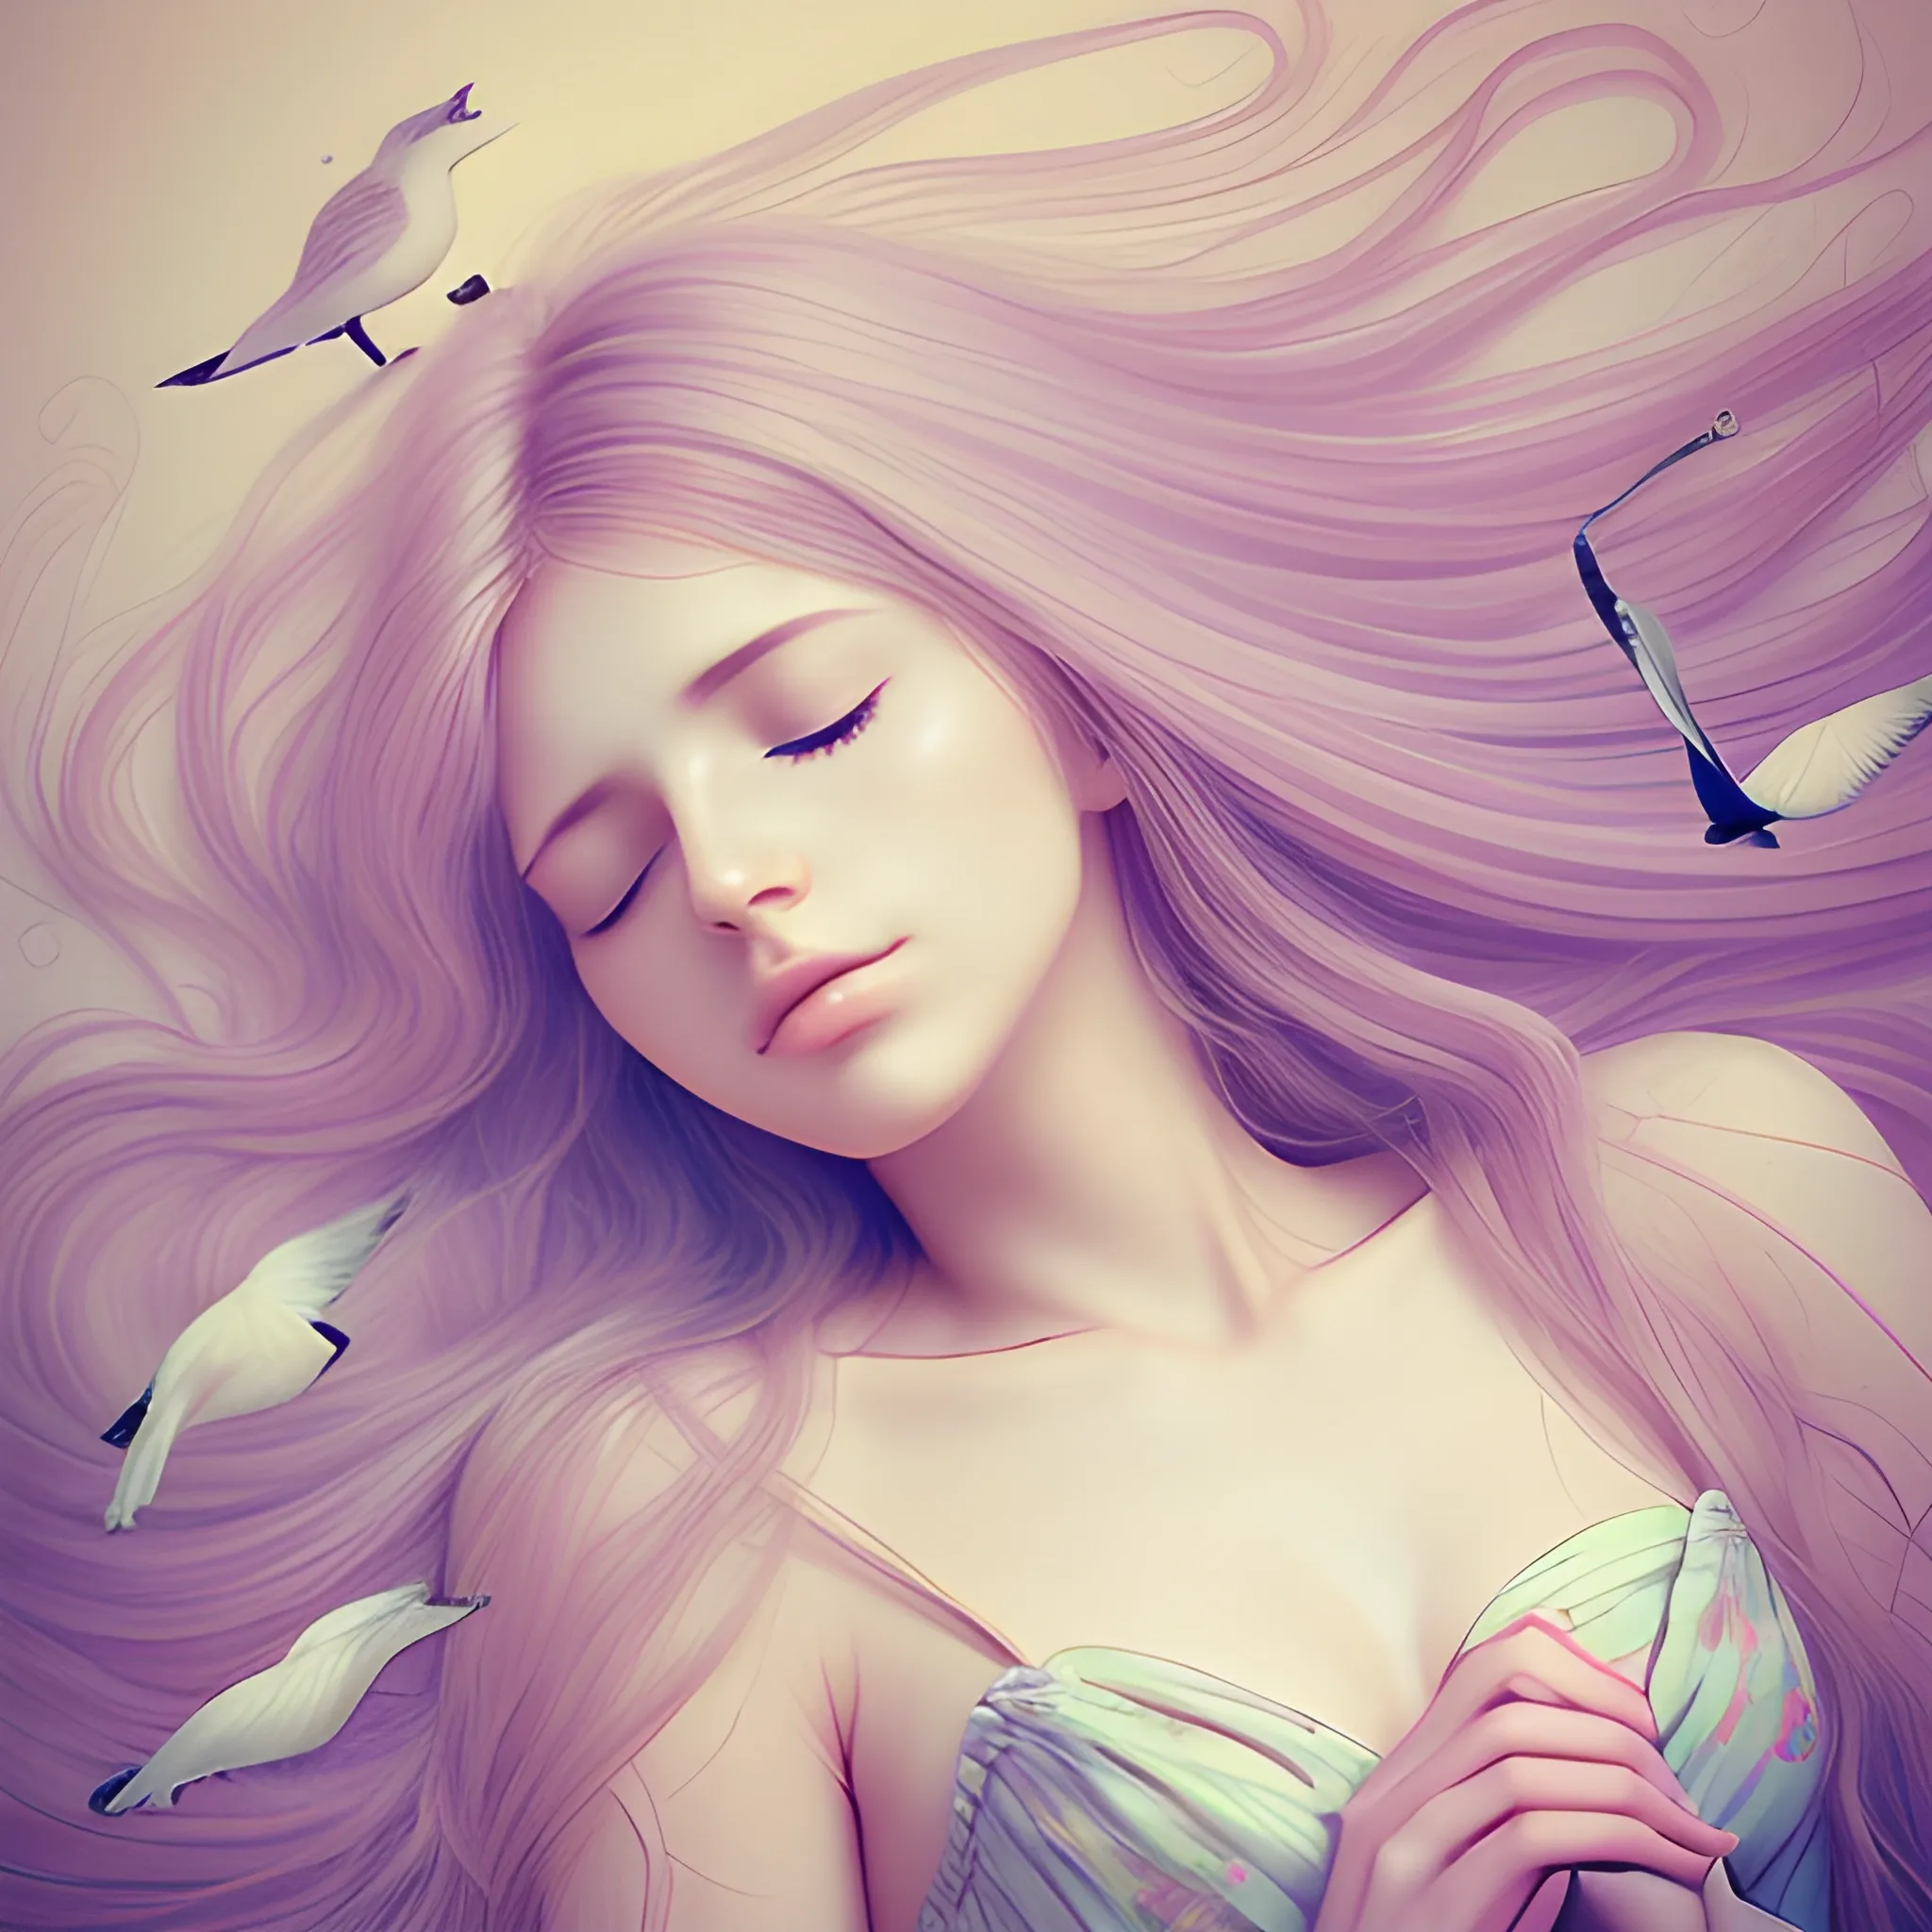 beautiful woman sleeping, peace, innocence, serenity, long hair, birds, surreal, pastel colors, high definition, awesome graphics